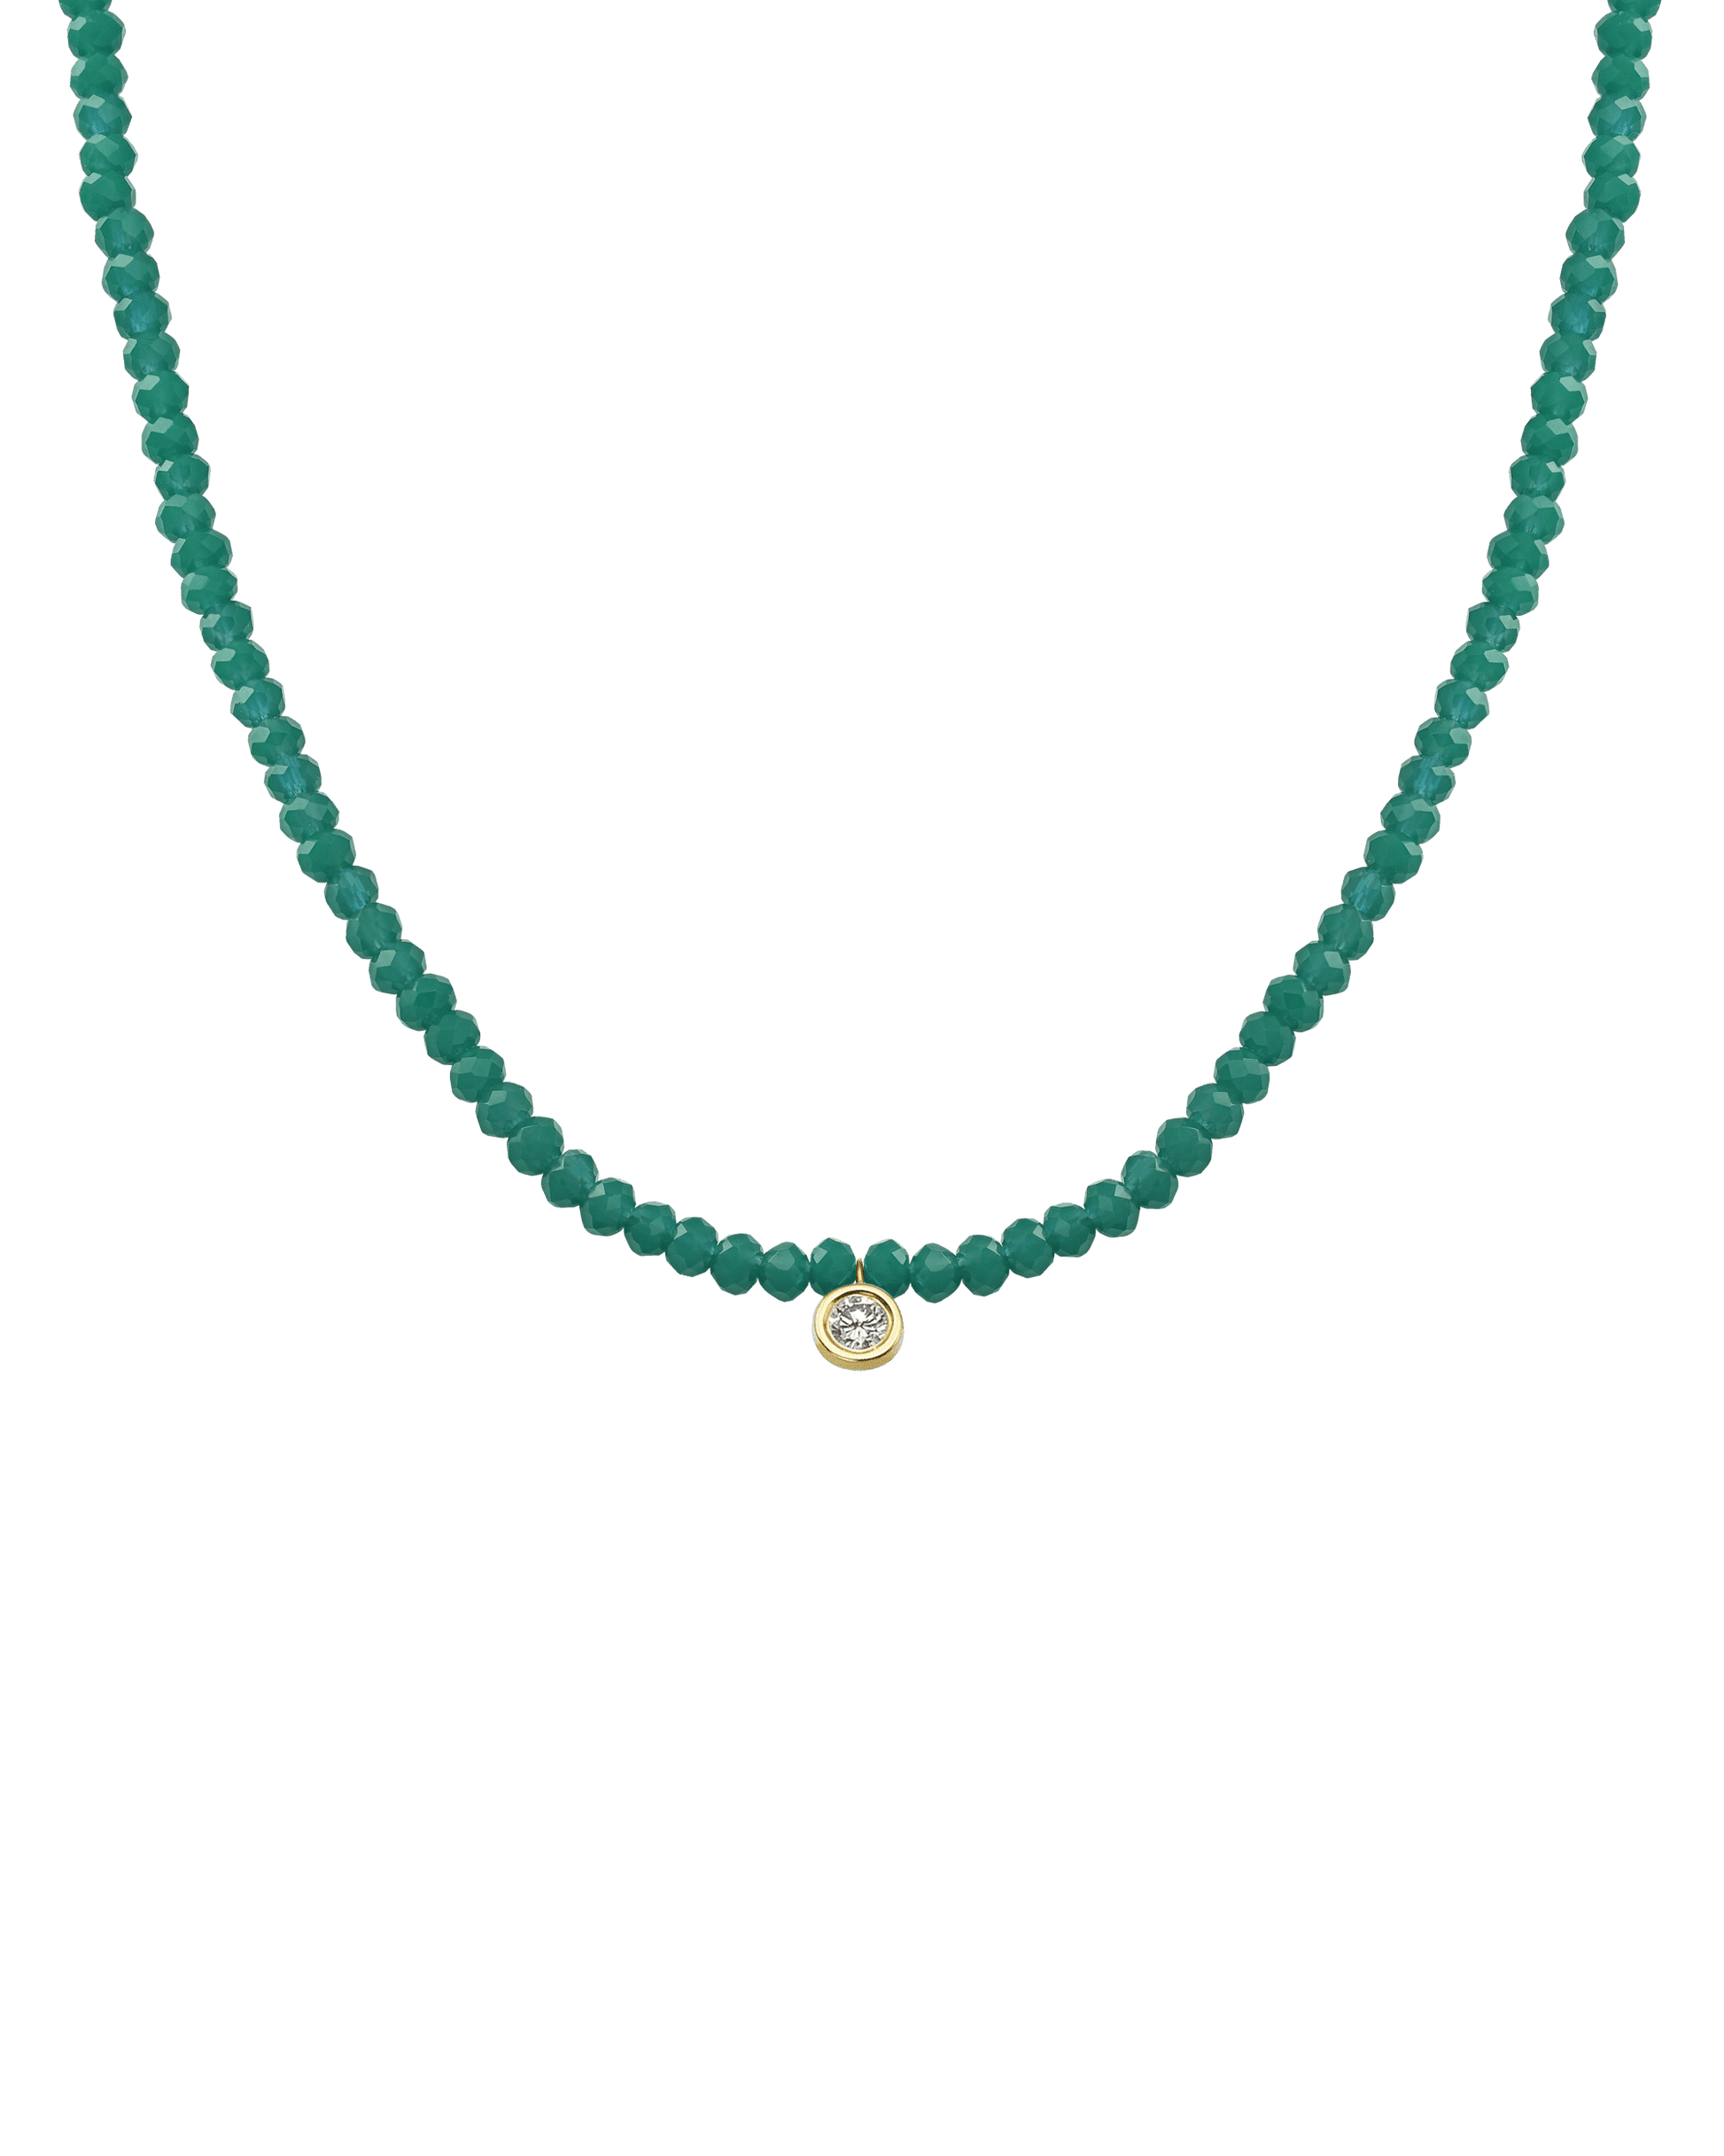 The Gemstone & Diamond Necklace - 14K Yellow Gold Necklaces 14K Solid Gold Natural Emerald Large: 0.1ct 14"